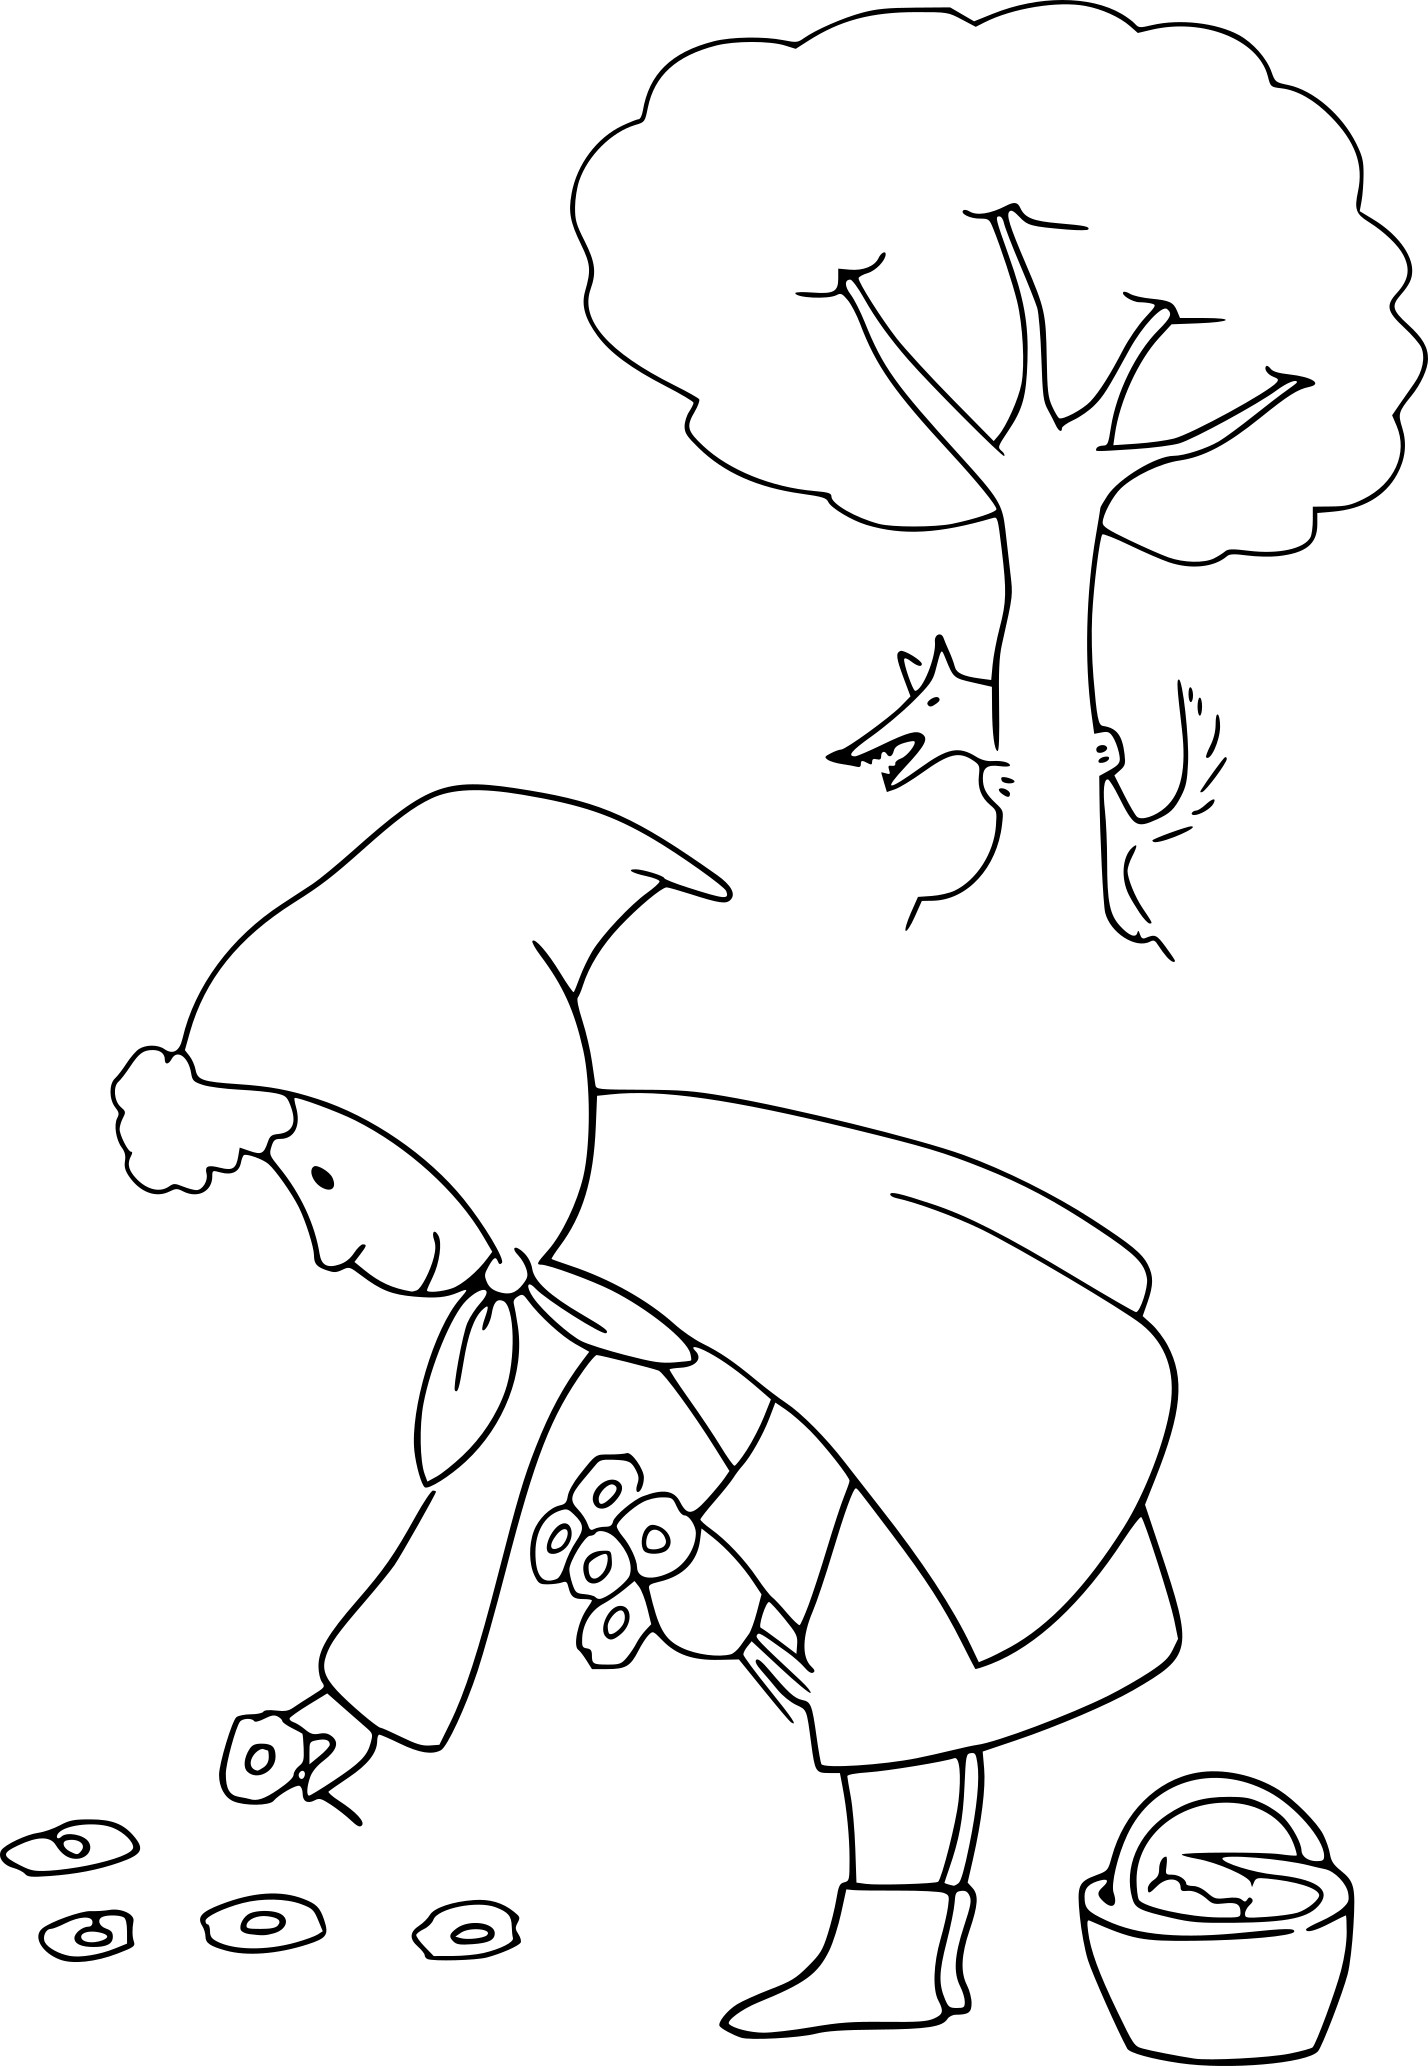 Red Riding Hood coloring page